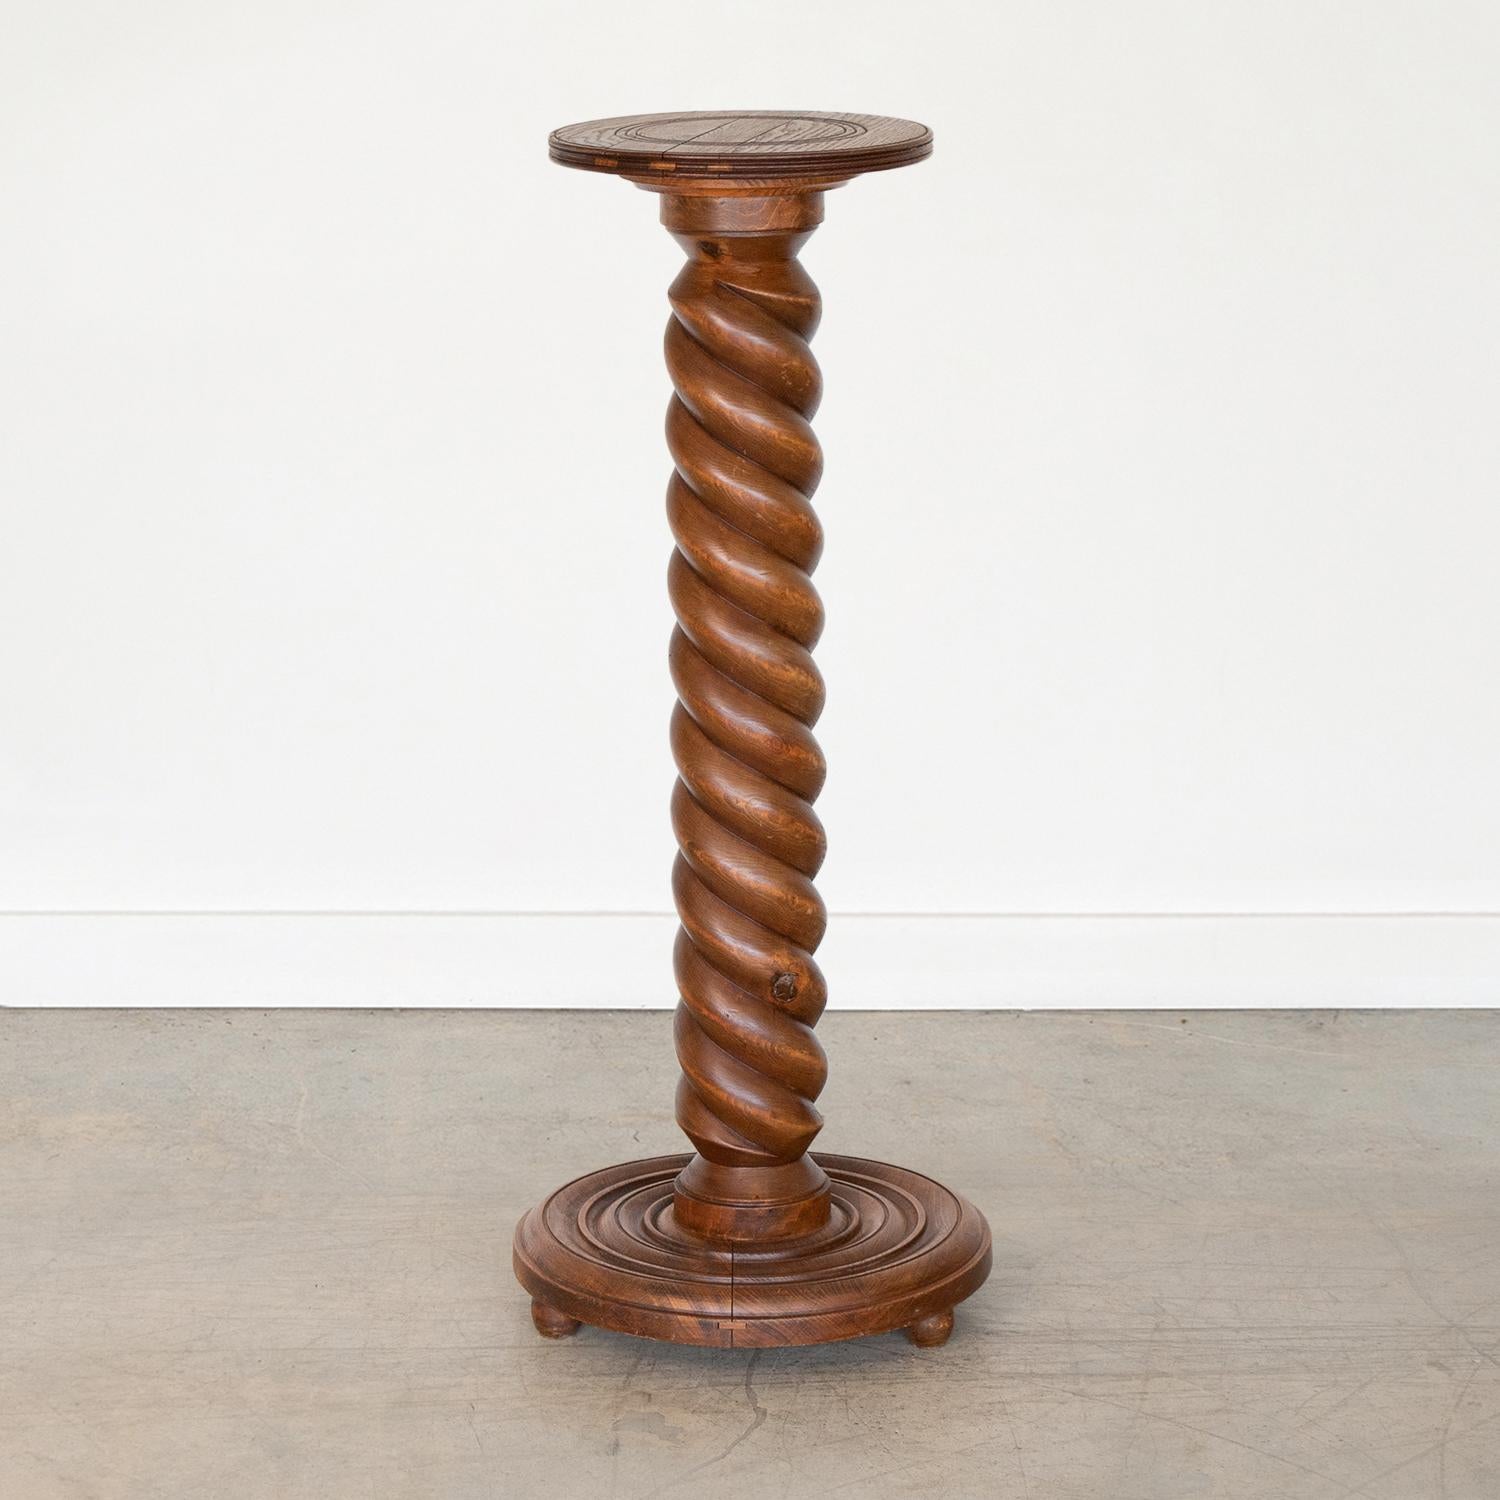 Beautiful vintage twisted wood pedestal table from France. Nice original red wood finish with thick carved twirl stem and circular top. Carved ring detail on top and base. 

Base measures 18